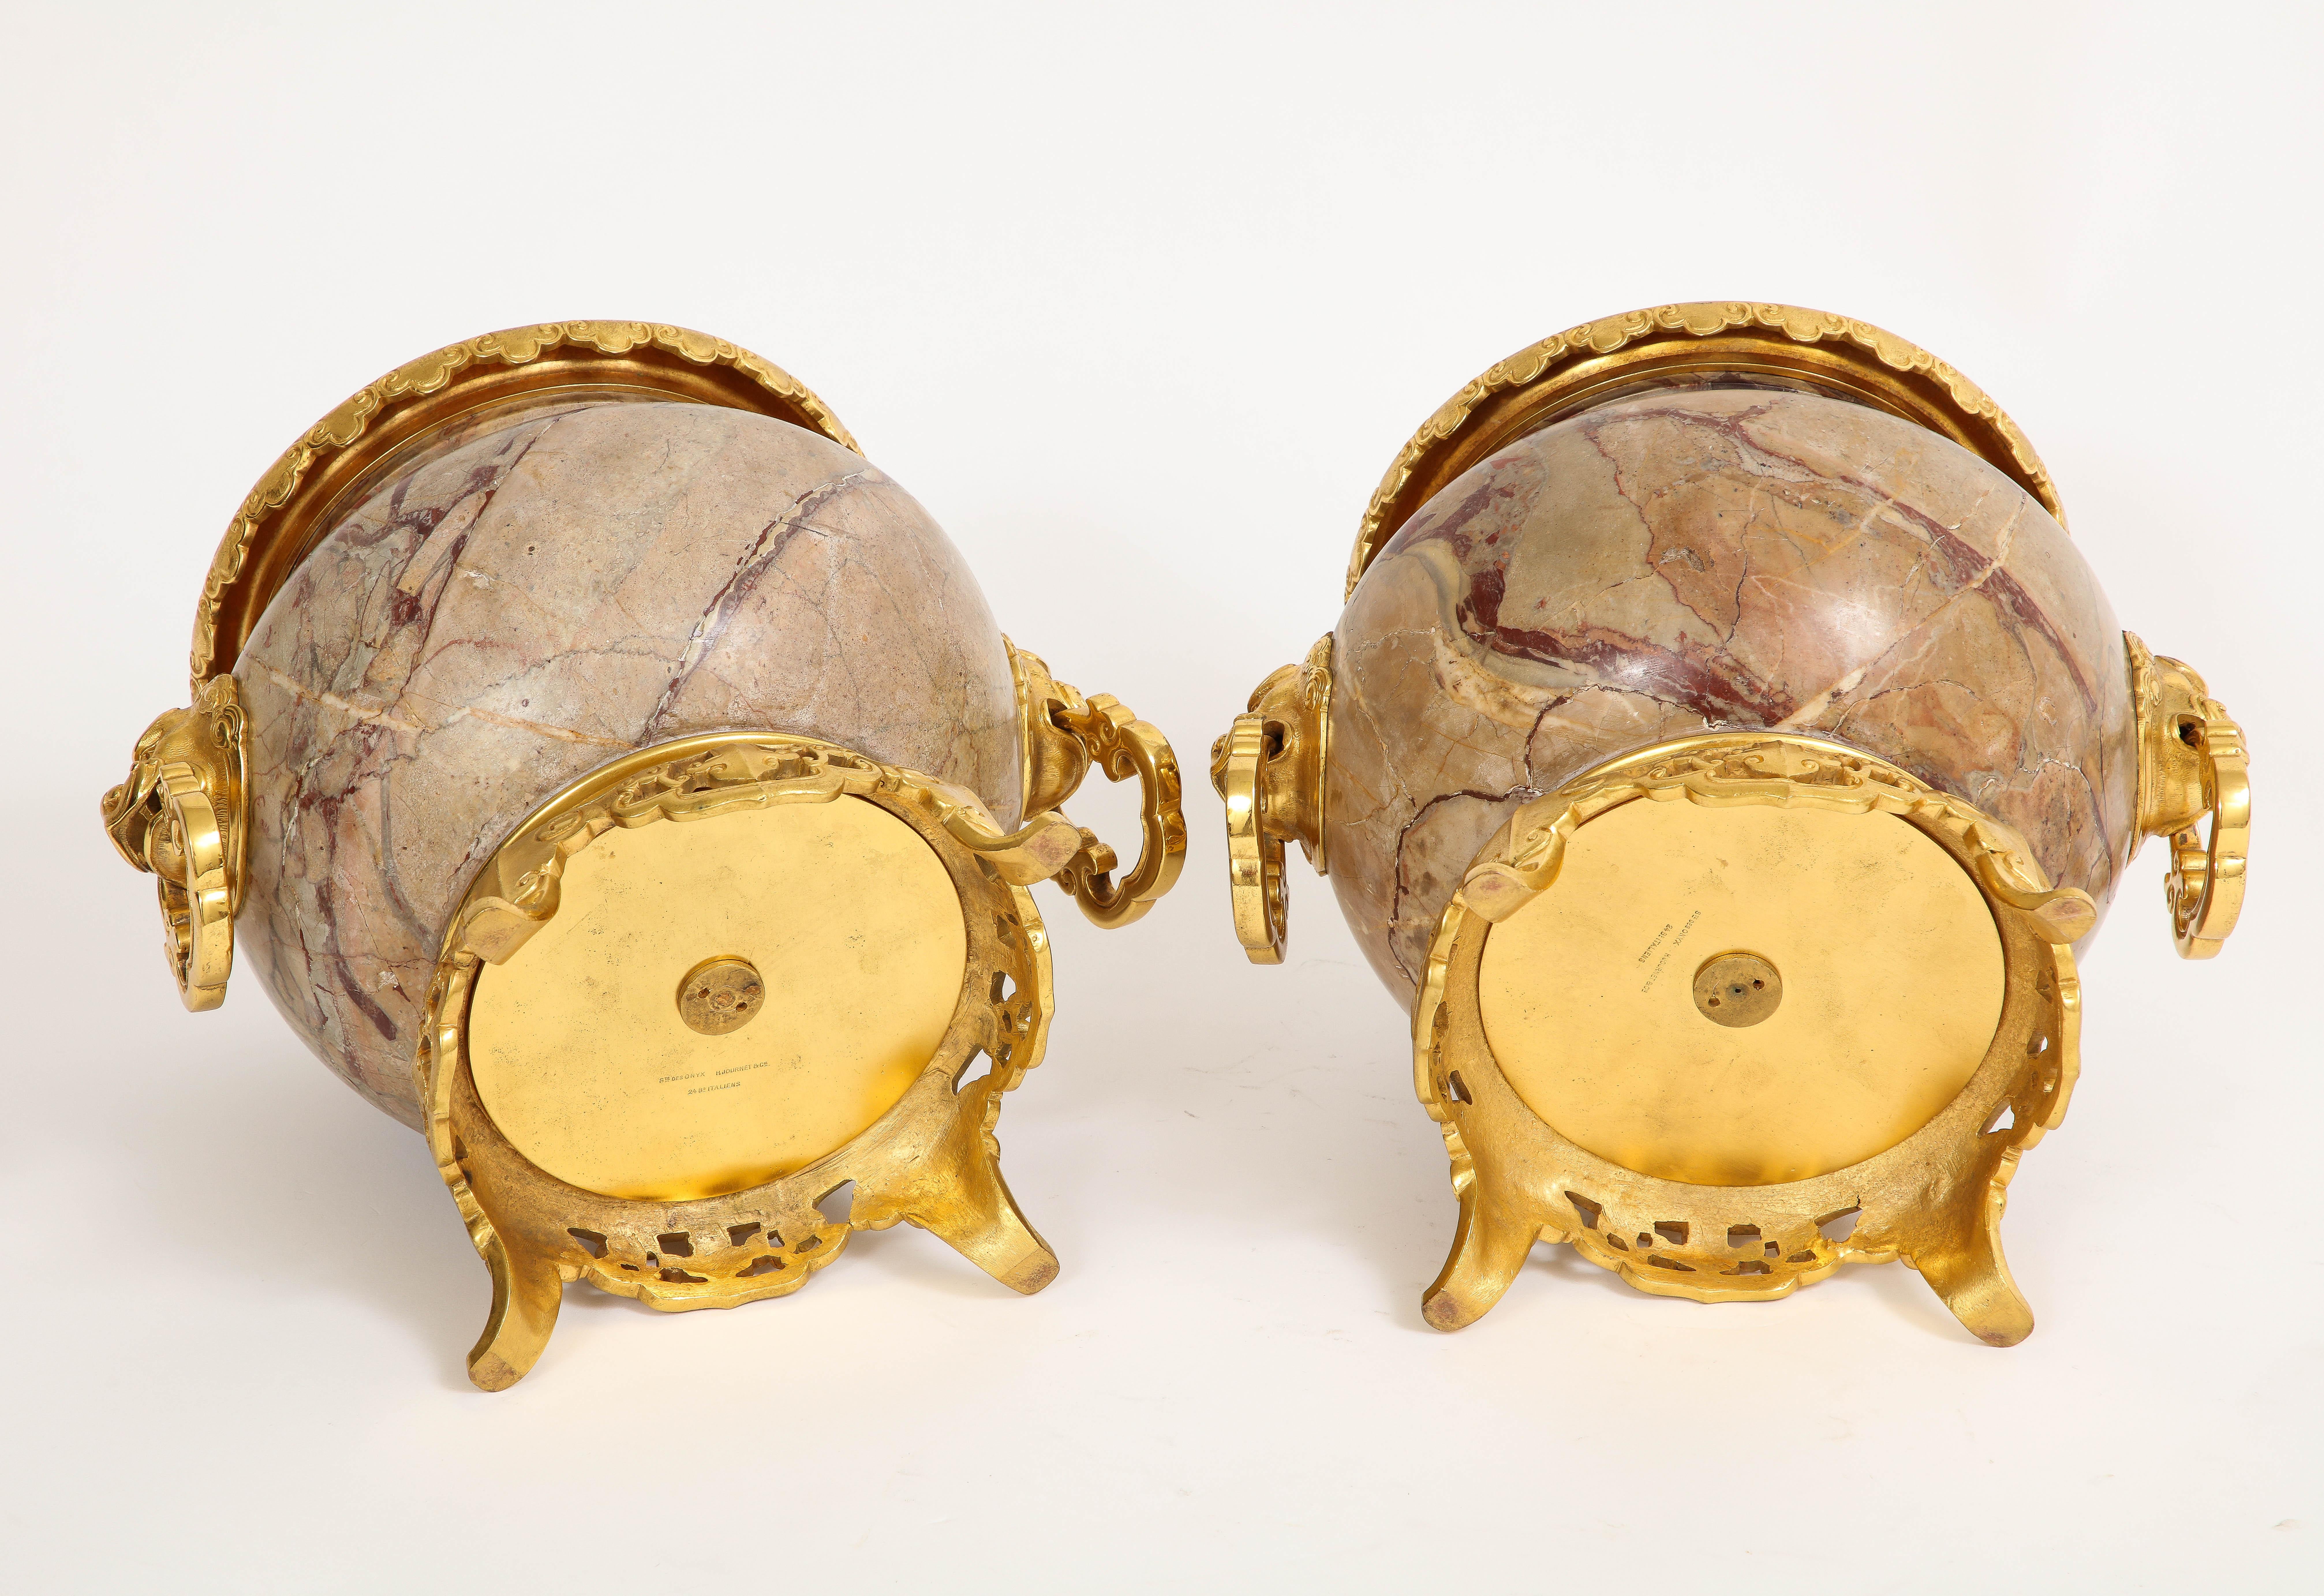 Pair of 19th Century French Ormolu Mounted Marble Centerpieces, H. Journet & Cie For Sale 6